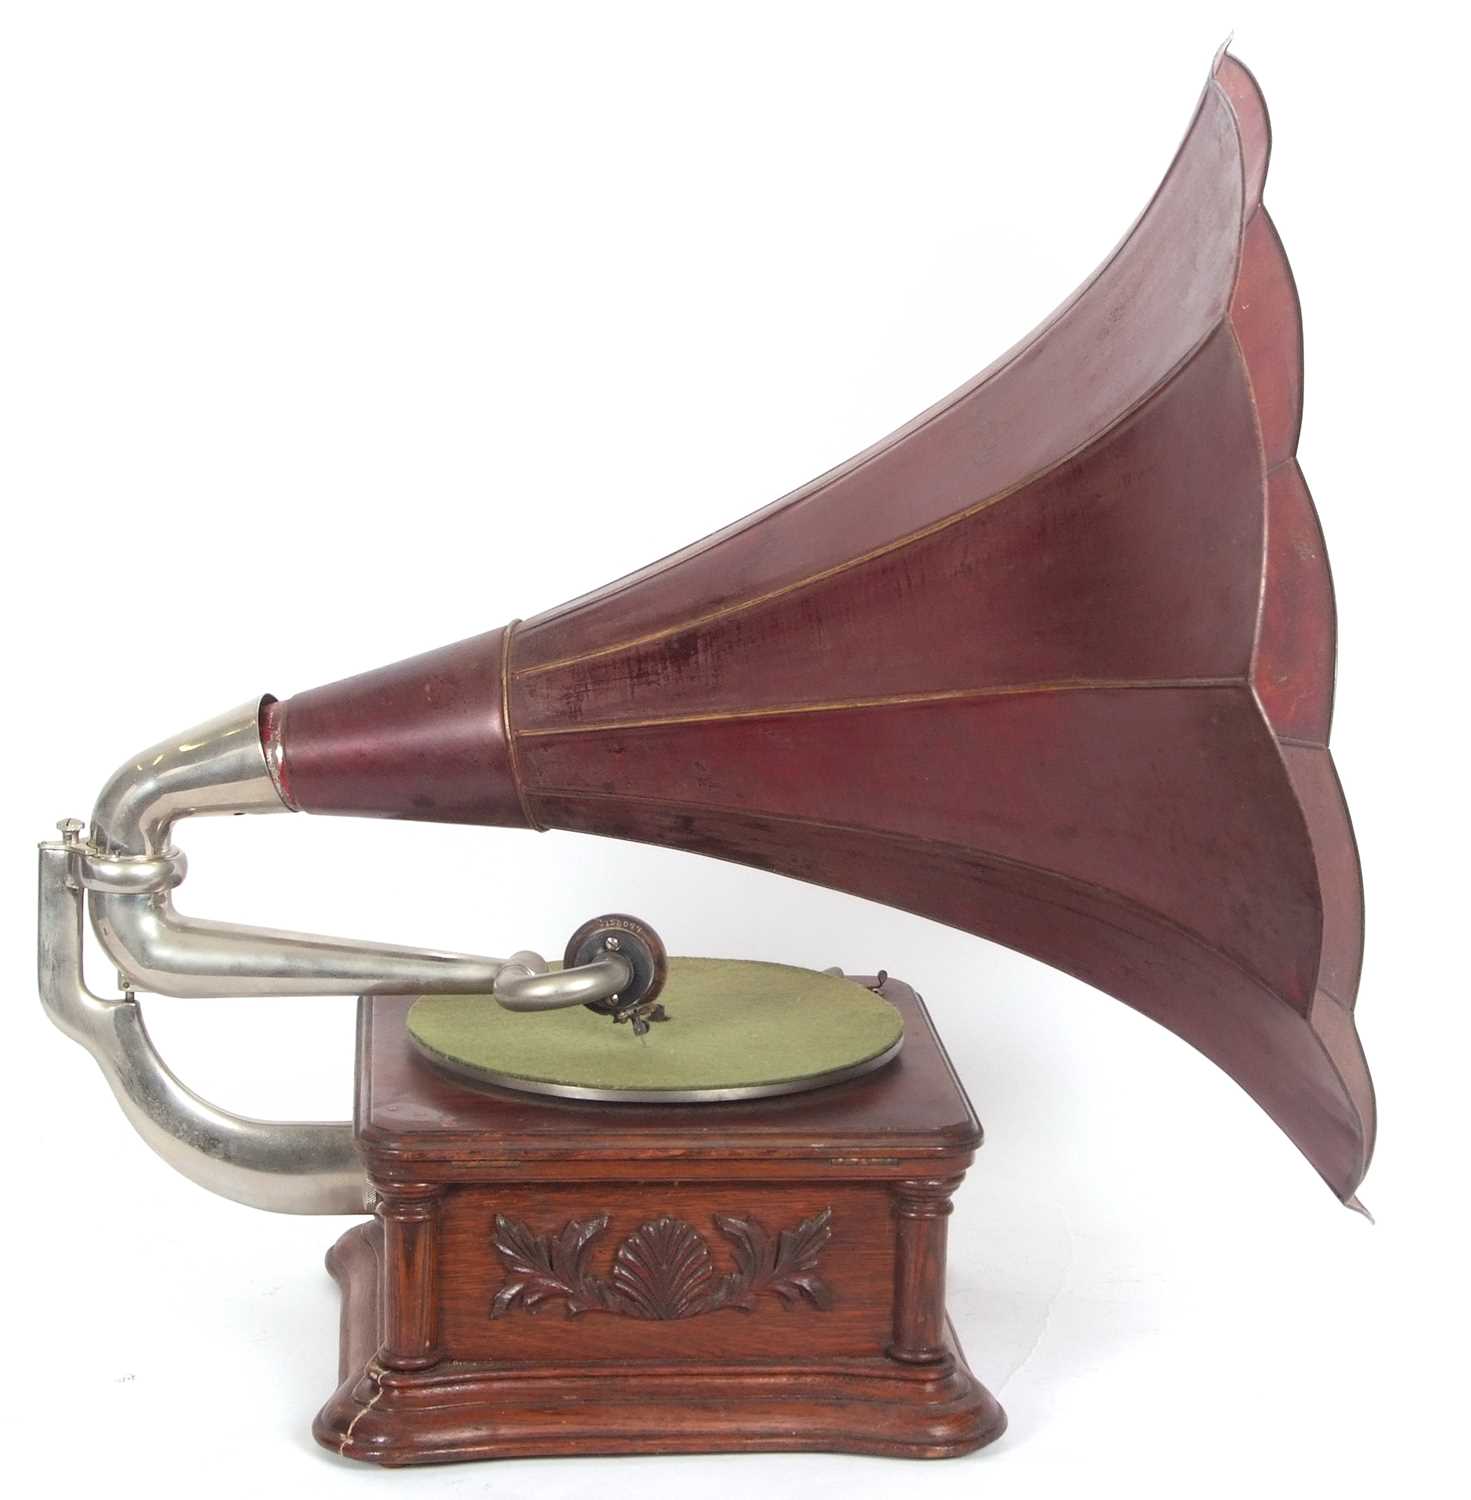 Rare Early Monarch Gramophone by The Gramophone & Typewriter Ltd - Image 10 of 10